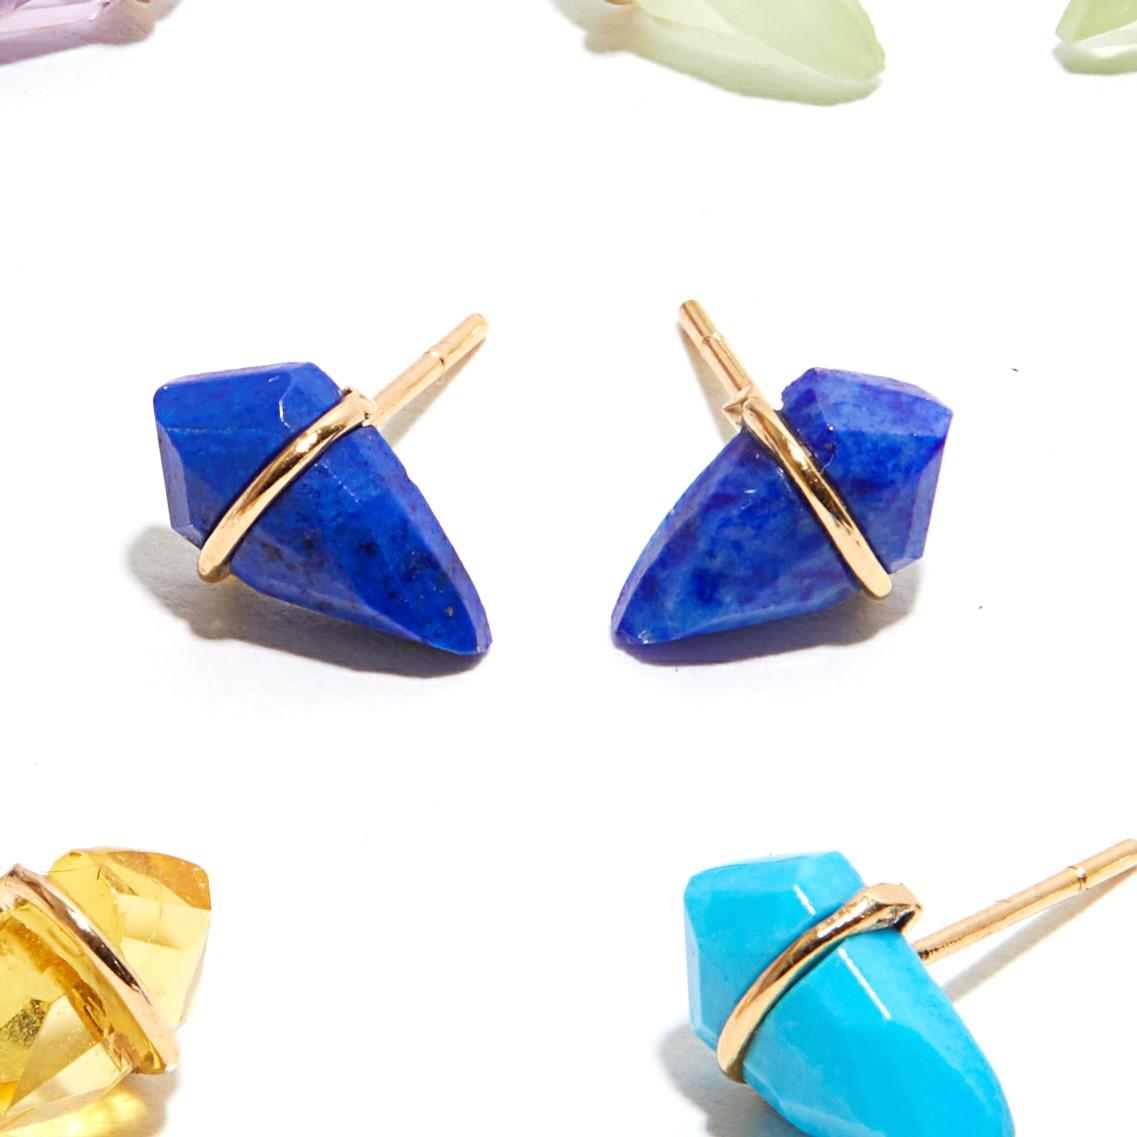 A fresh take on a classic style. These lightweight stud earrings feature lapis which has been hand-cut into Page’s signature Kite shape. The stones have then been wrapped in 18kt gold. Perfect for any occasion and suitable for everyday wear, the